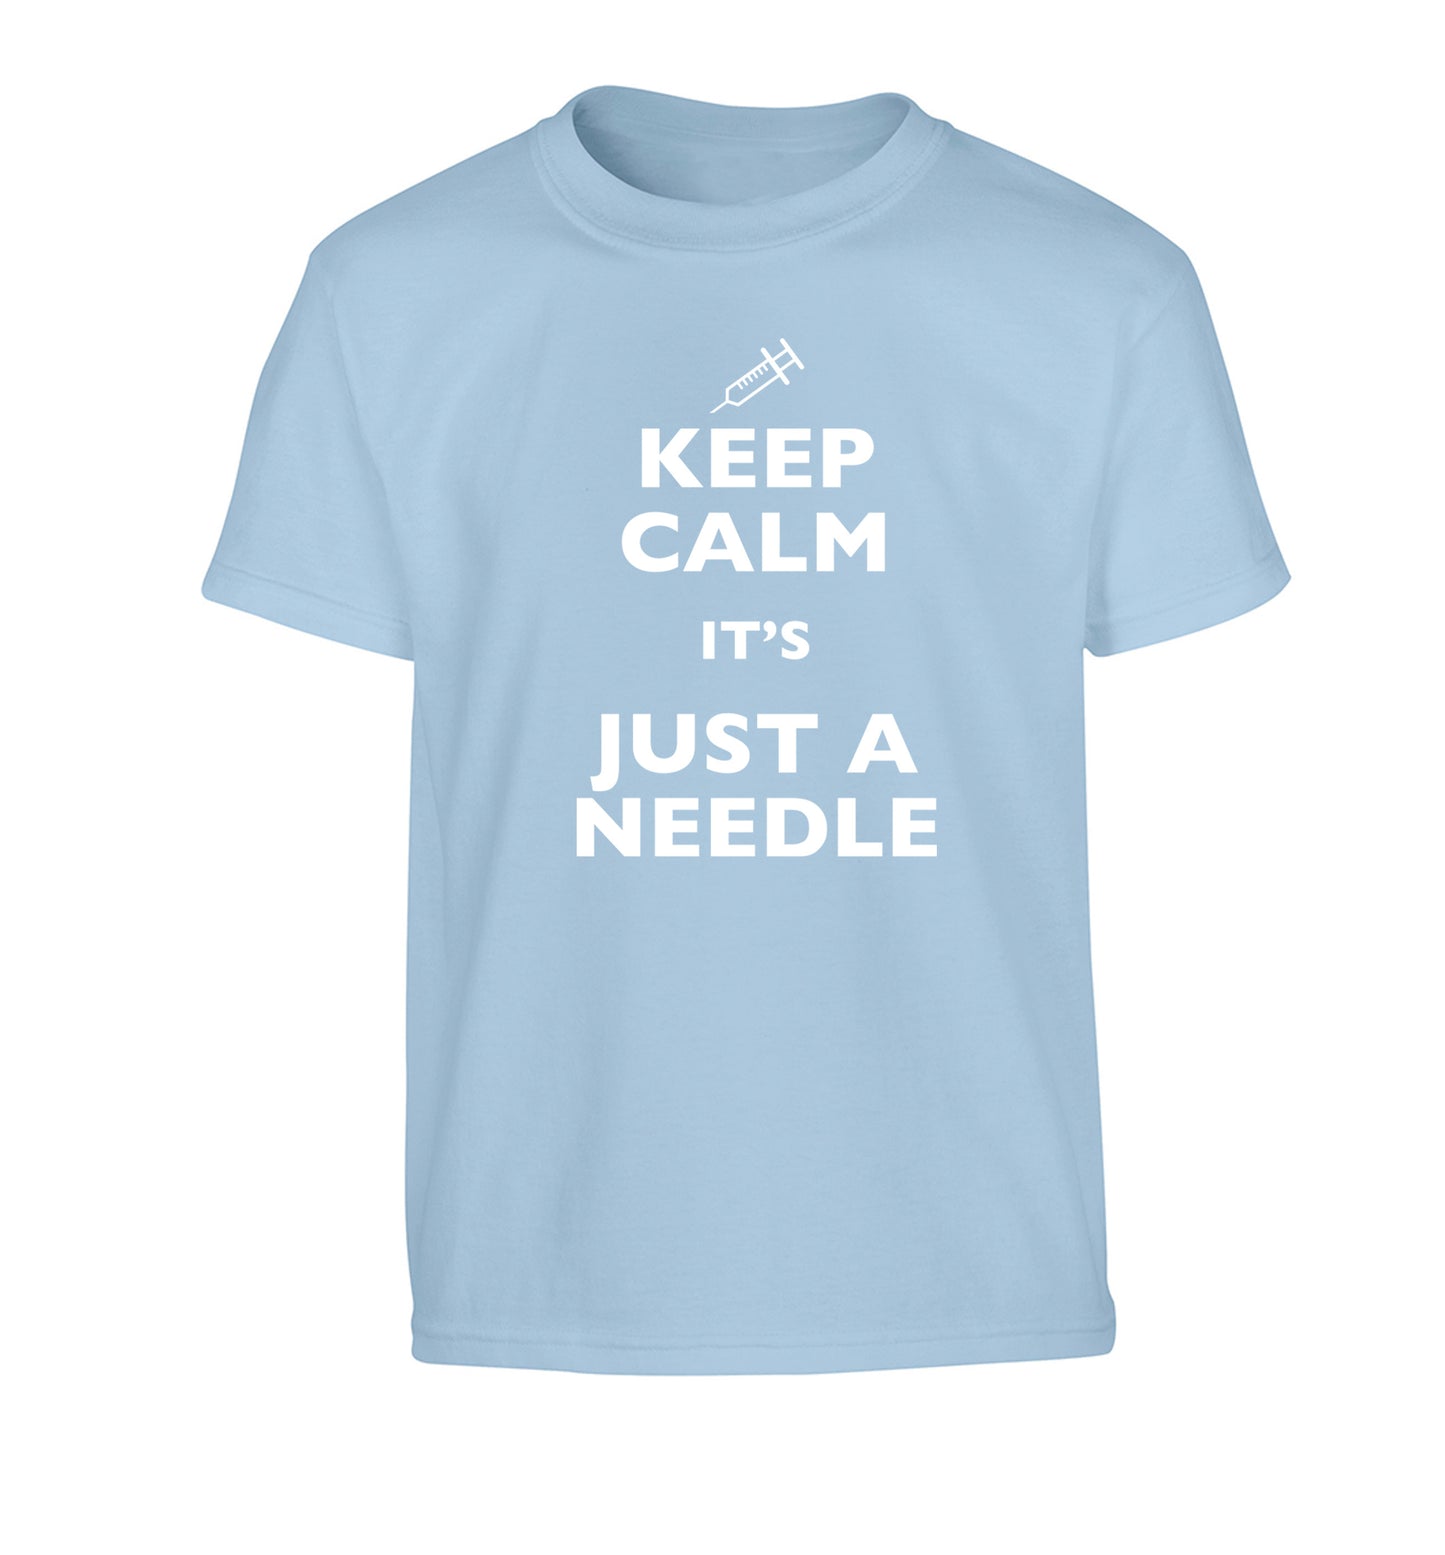 Keep calm it's only a needle Children's light blue Tshirt 12-14 Years